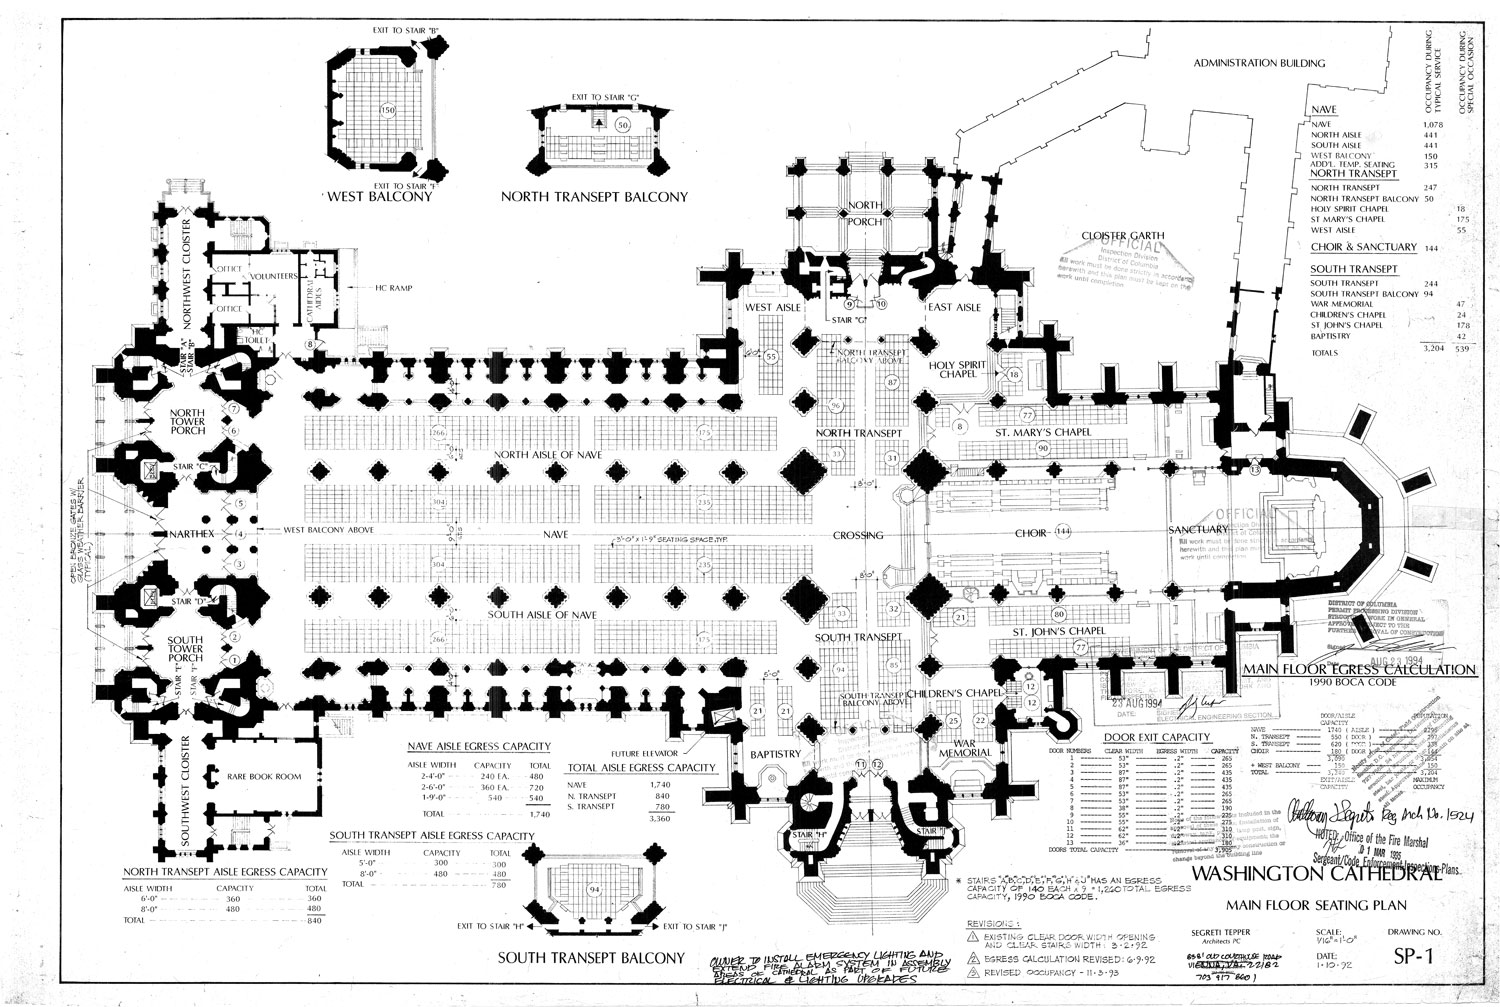 Washington Cathedral, Main Floor Seating Plan, 1993. Courtesy of Washington National Cathedral Construction Archives Collection, National Building Museum Collection.